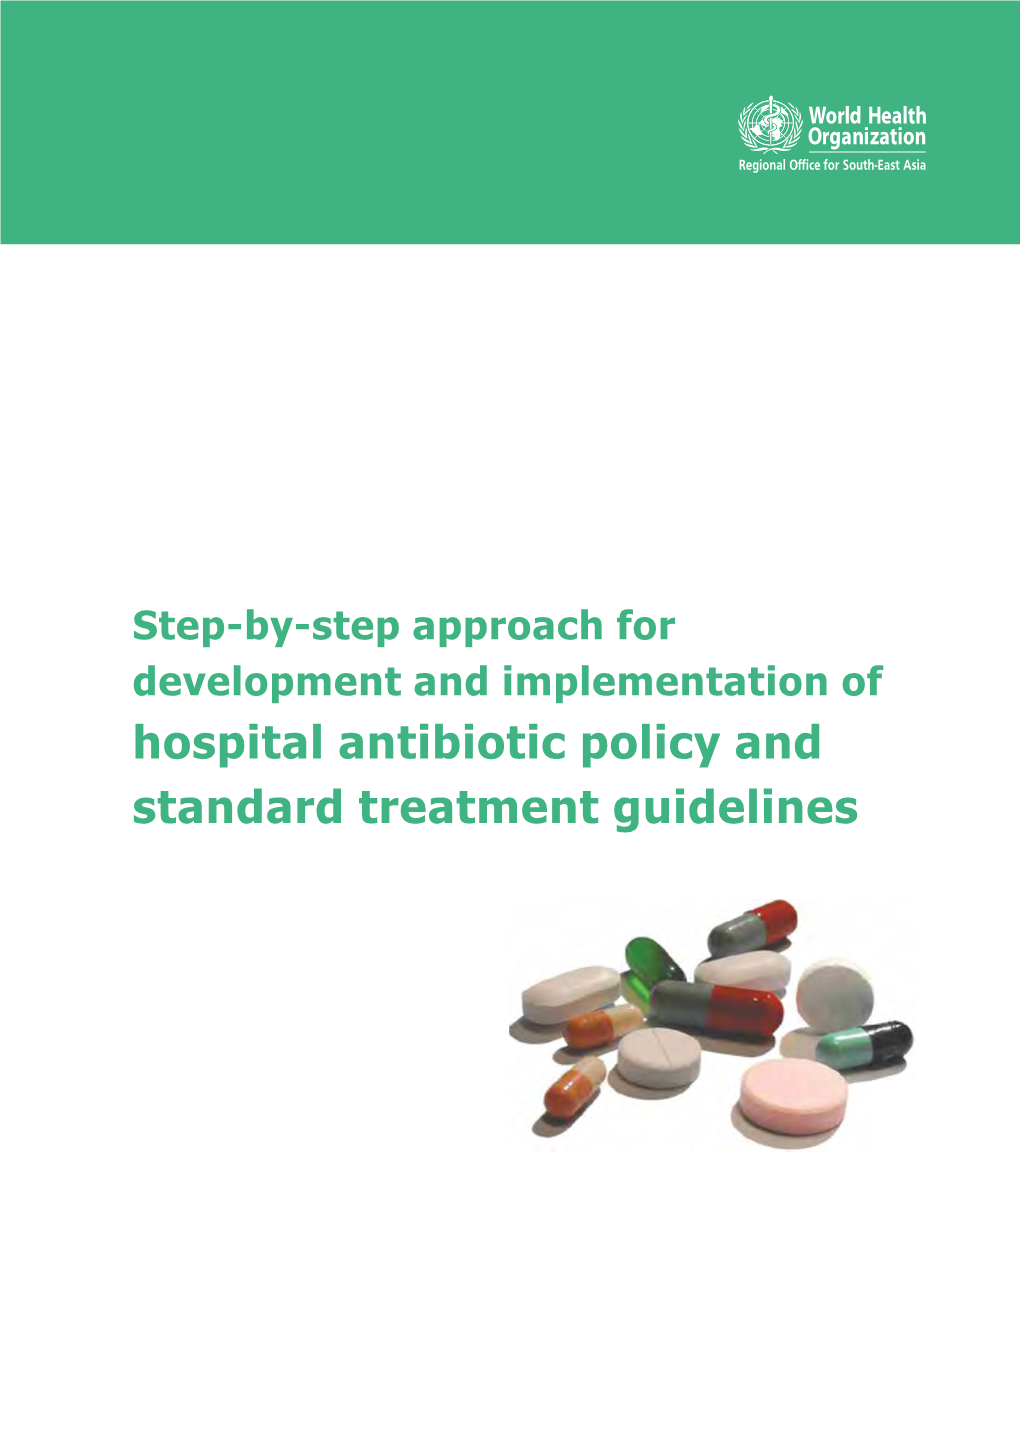 Hospital Antibiotic Policy and Standard Treatment Guidelines © World Health Organization 2011 All Rights Reserved